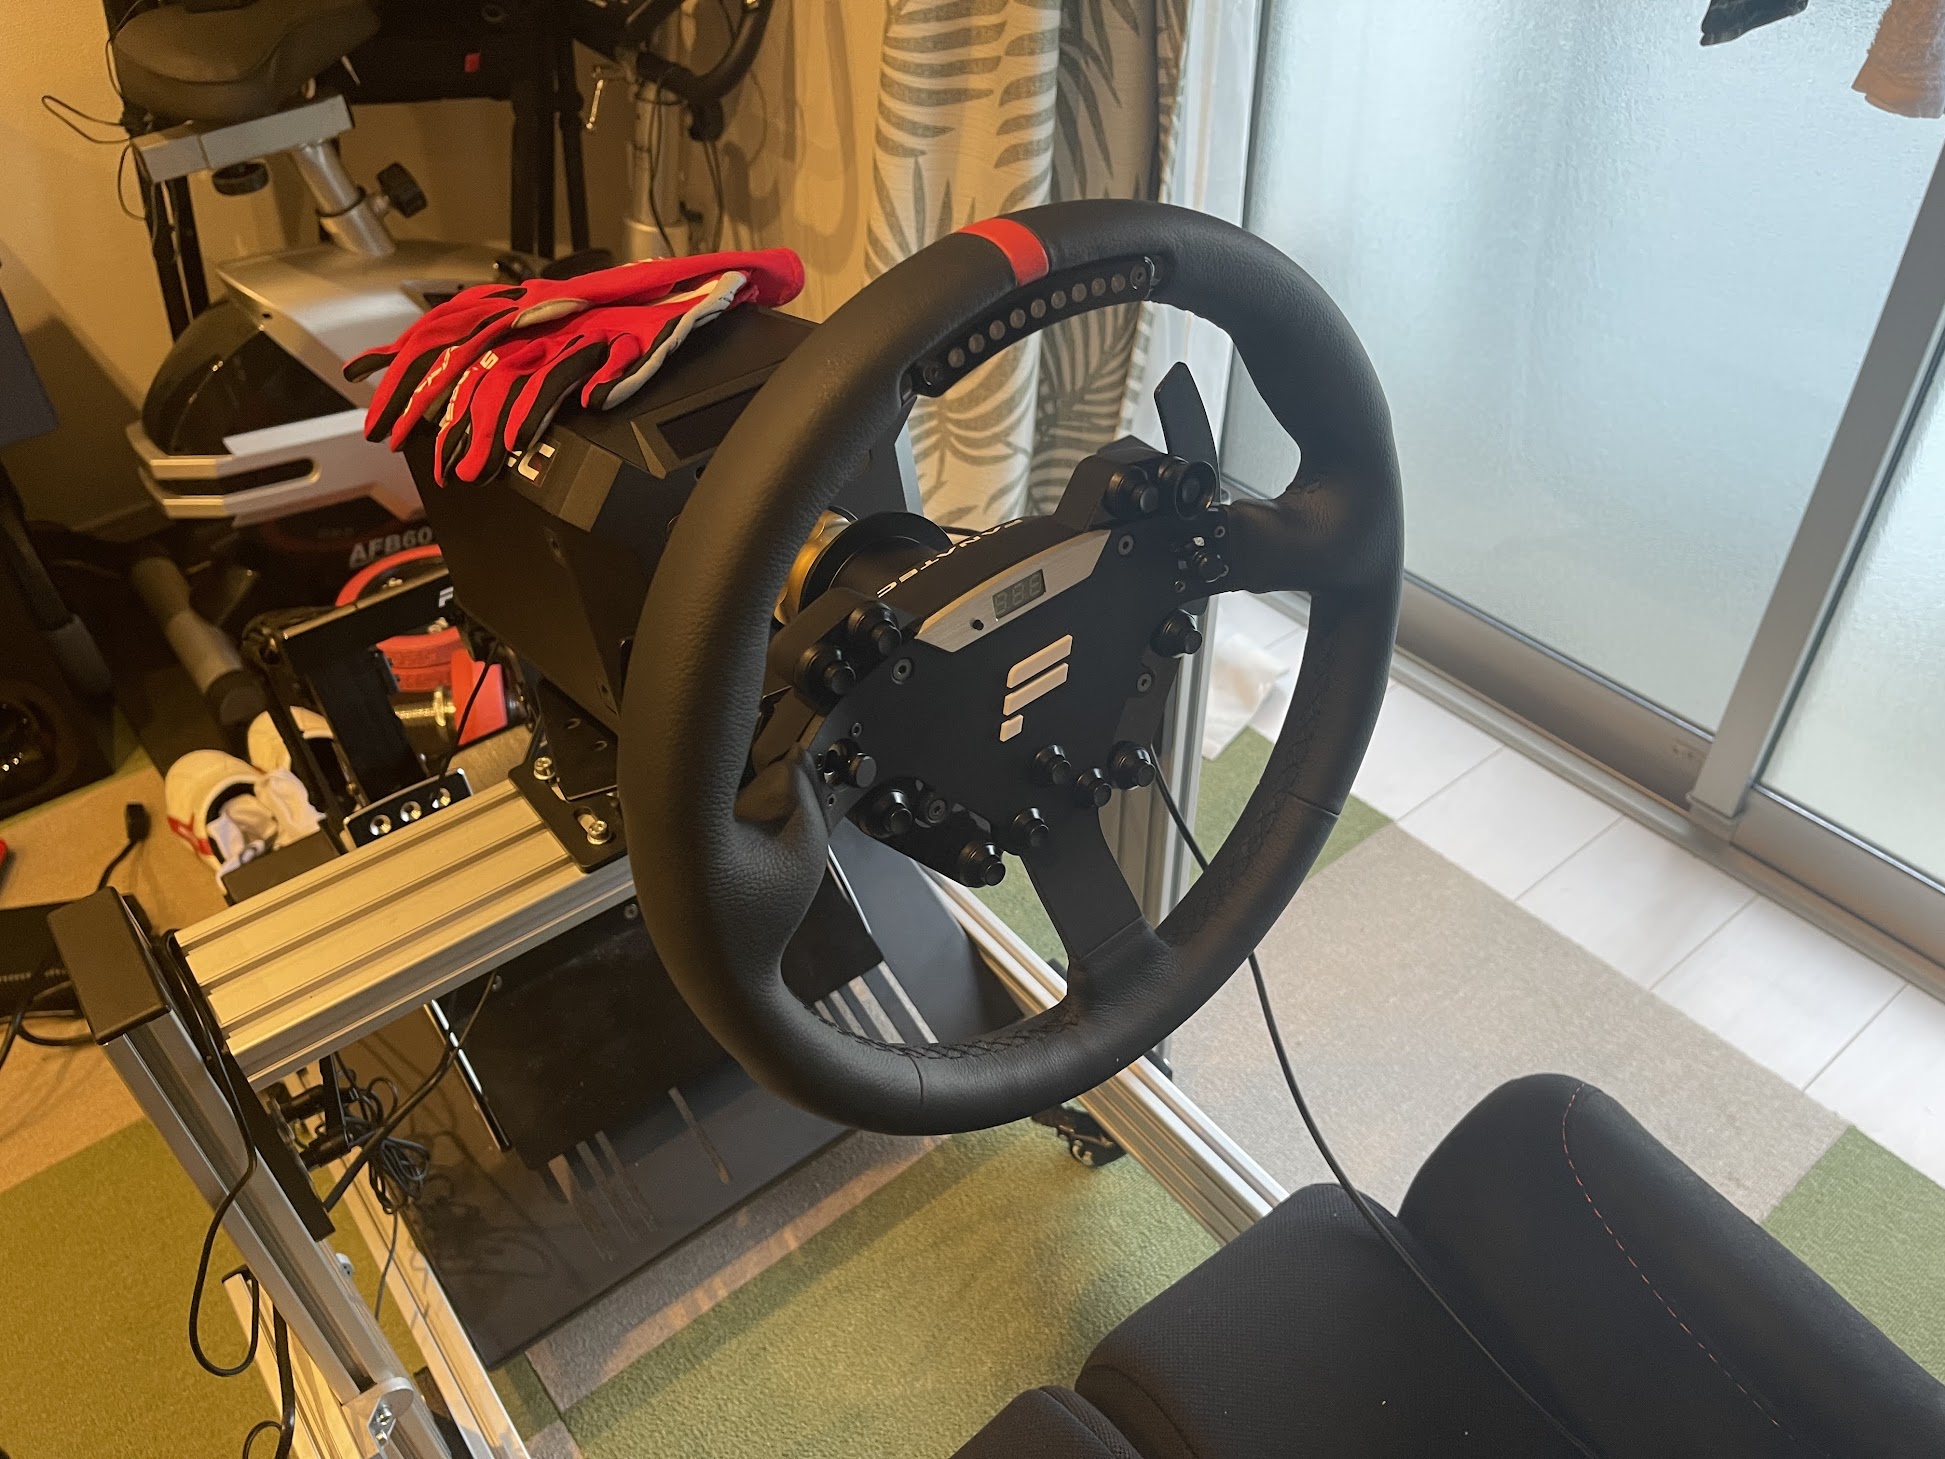 ClubSport Steering Wheel RS を買ったよ